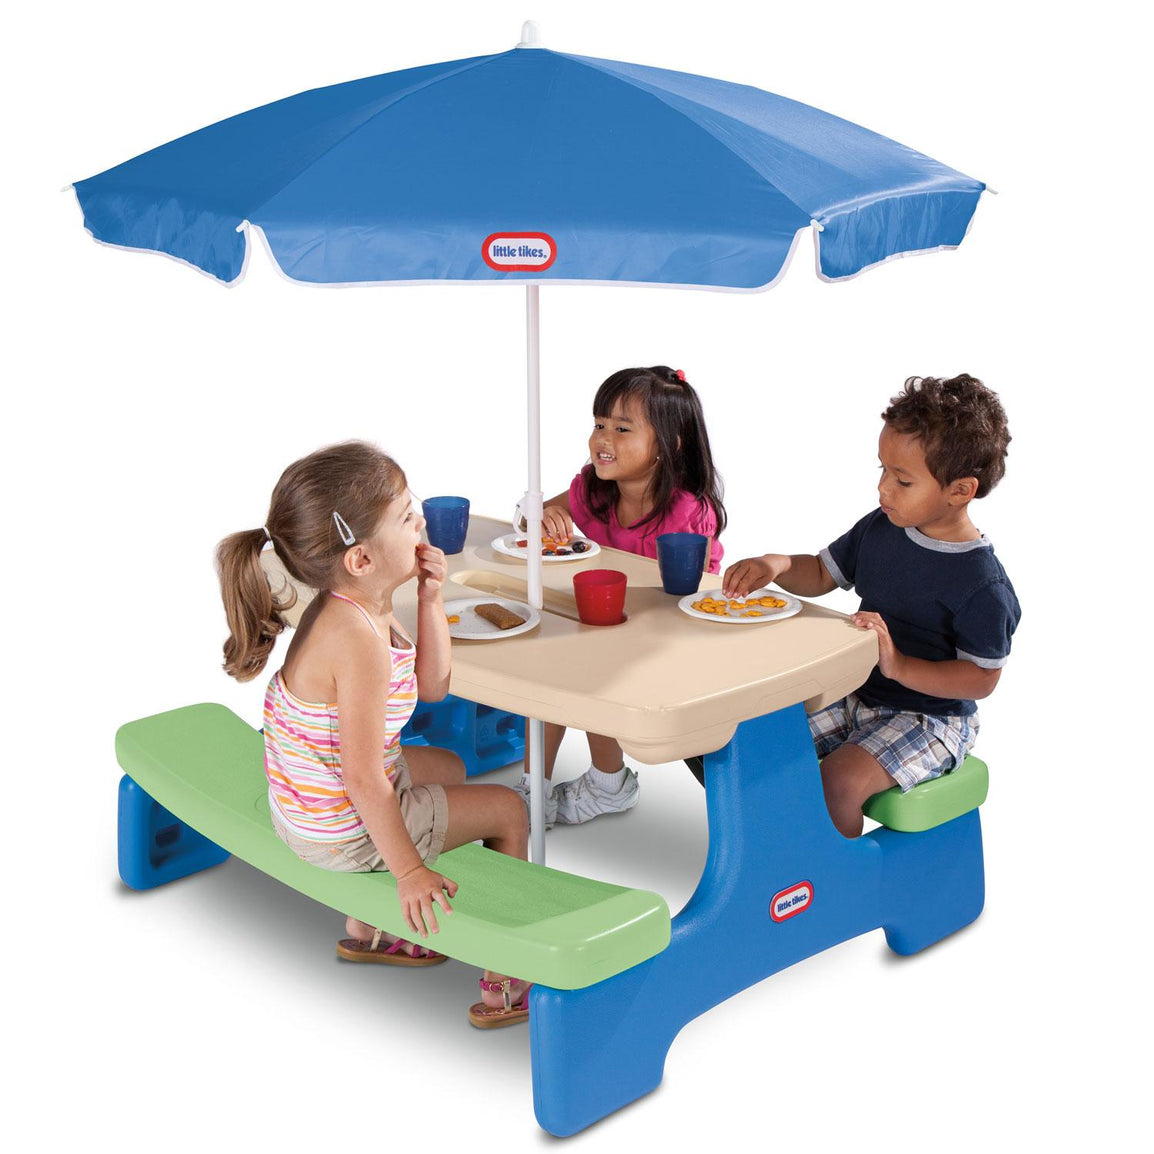 Easy Store™ Picnic Table with Umbrella - Blue\Green - Official Little Tikes Website